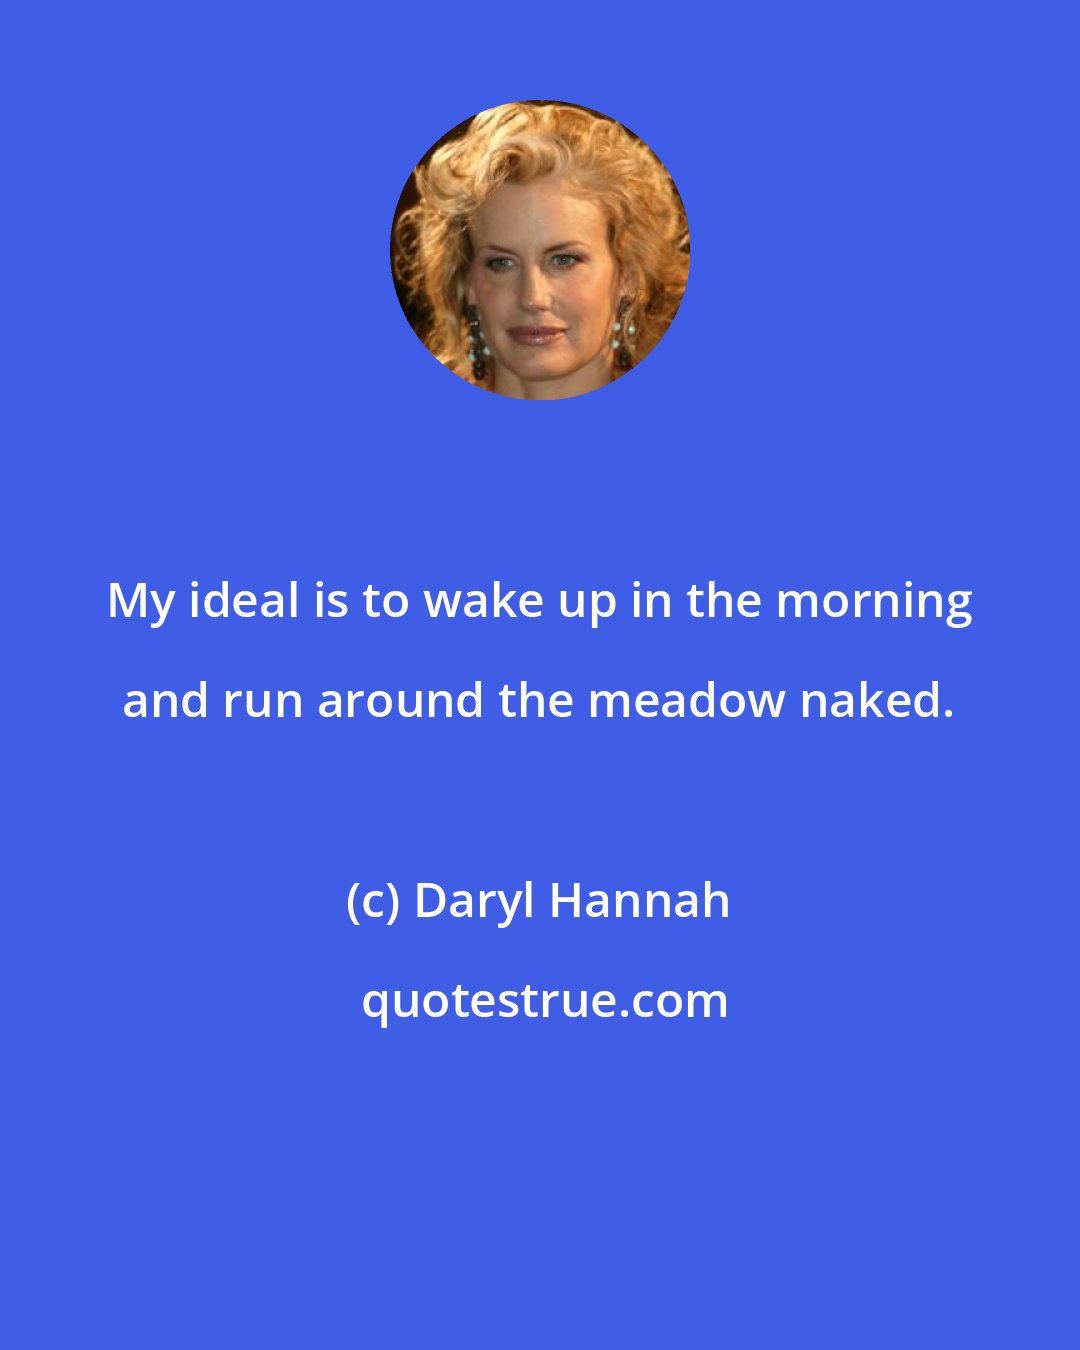 Daryl Hannah: My ideal is to wake up in the morning and run around the meadow naked.